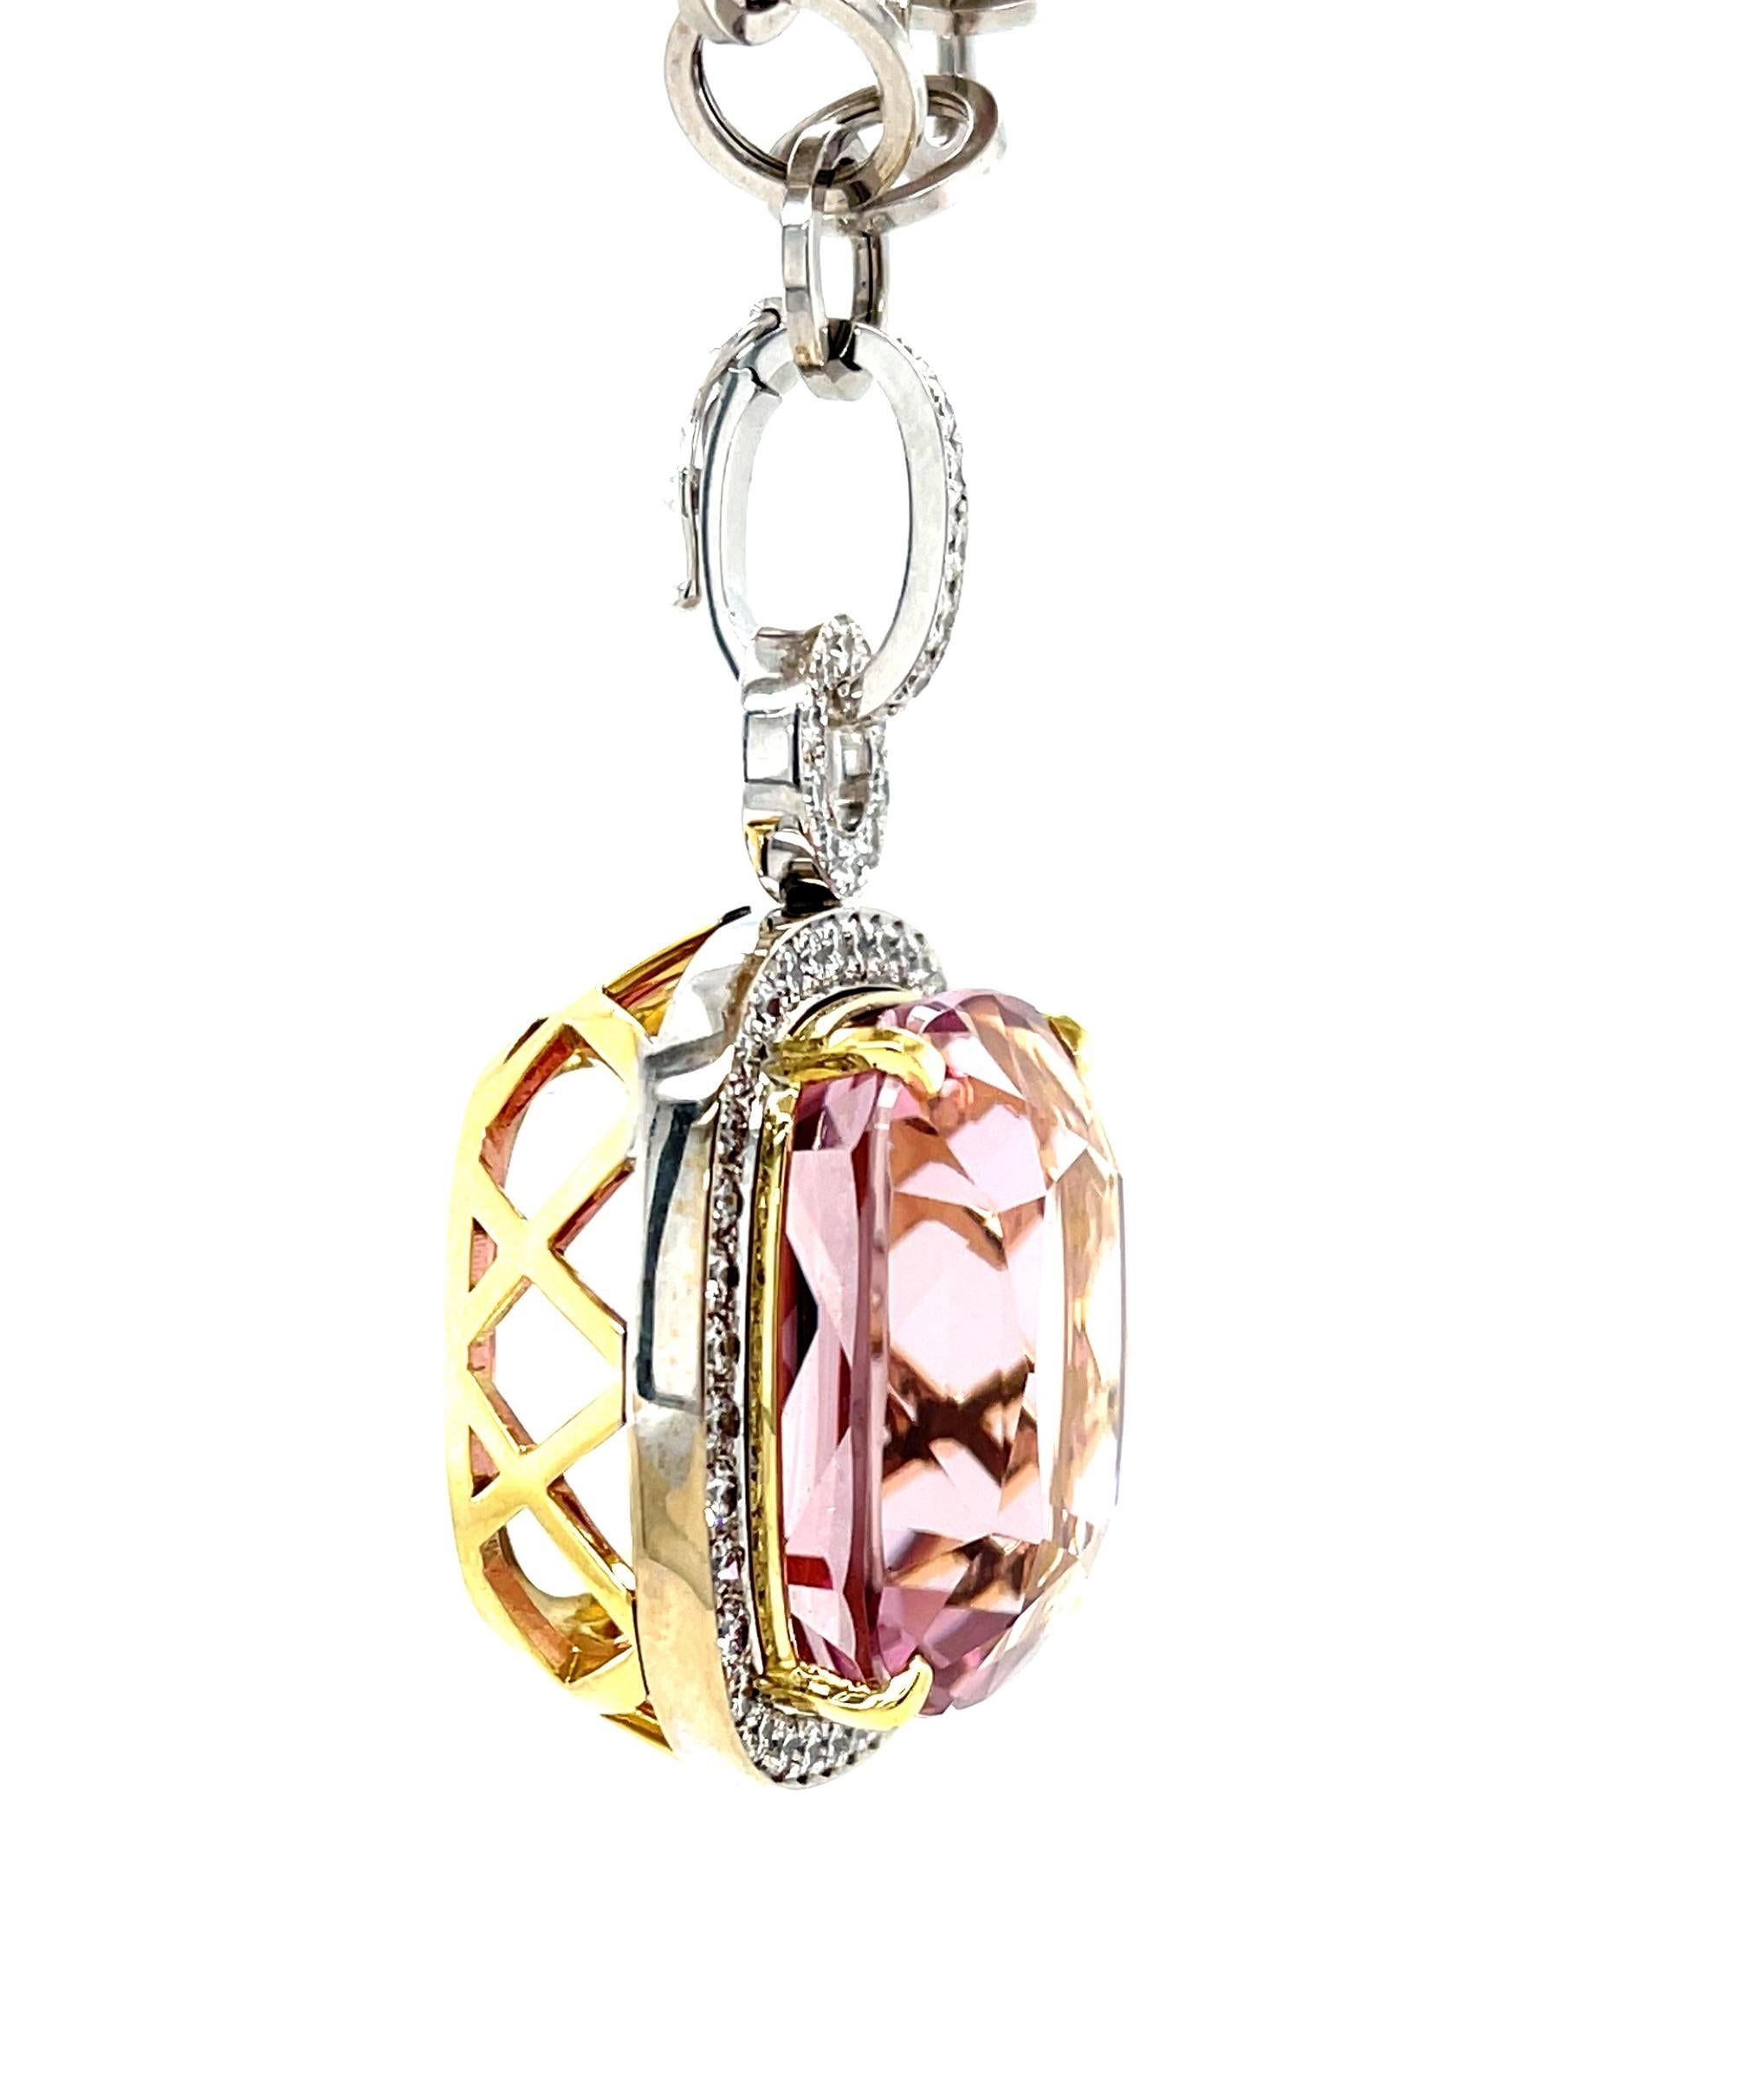 Women's 61.26 Carat Kunzite and Diamond Pendant Enhancer in 18k White and Yellow Gold For Sale